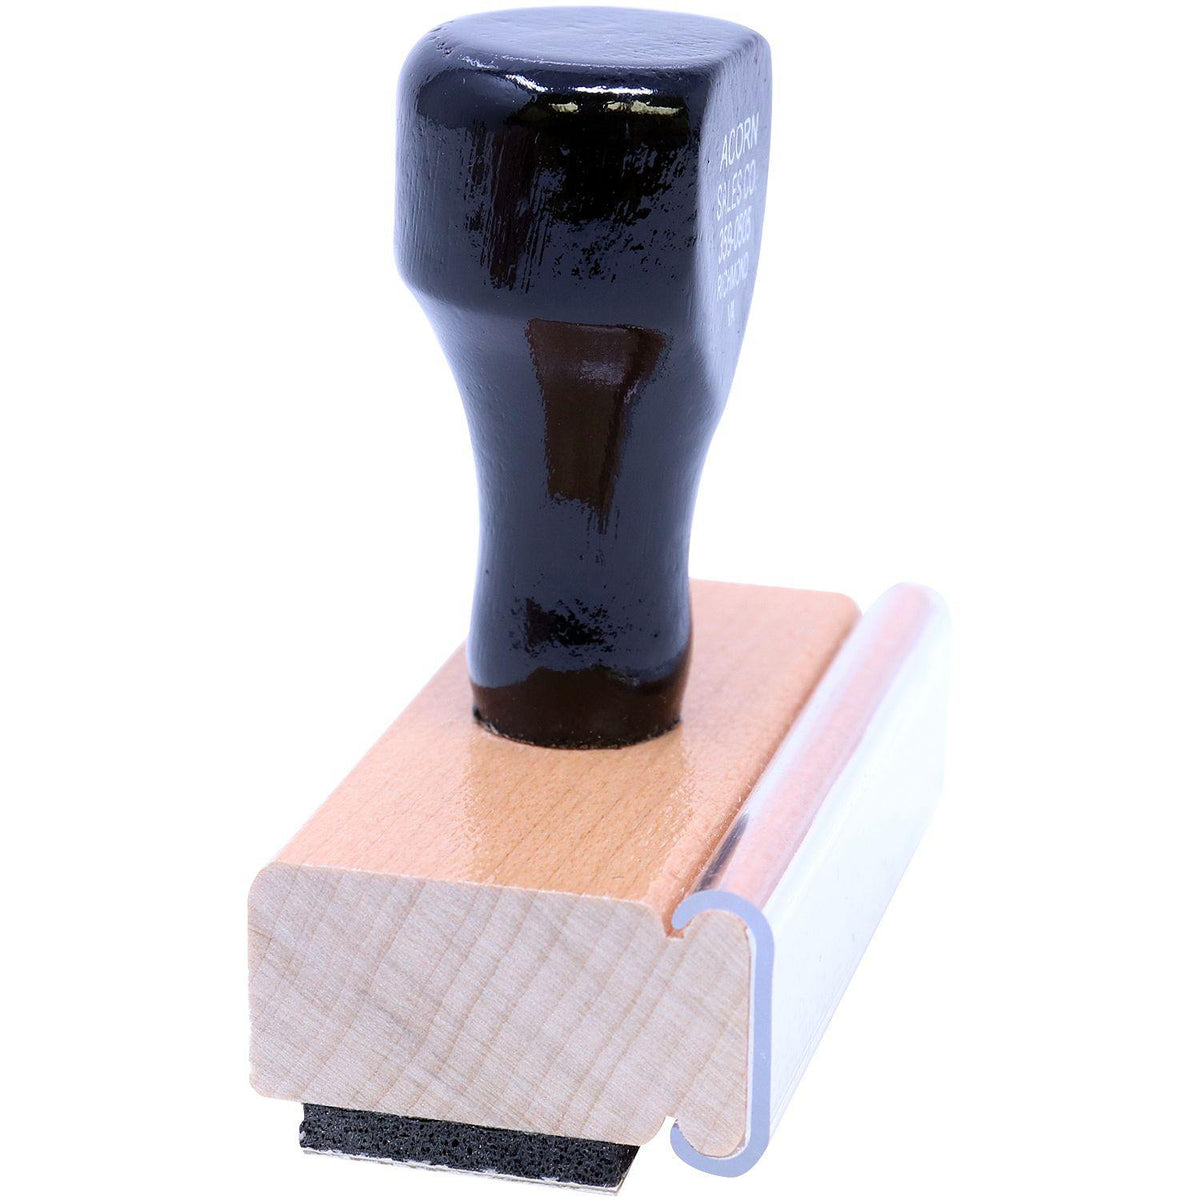 Side View of Large Outline Copy Rubber Stamp at an Angle